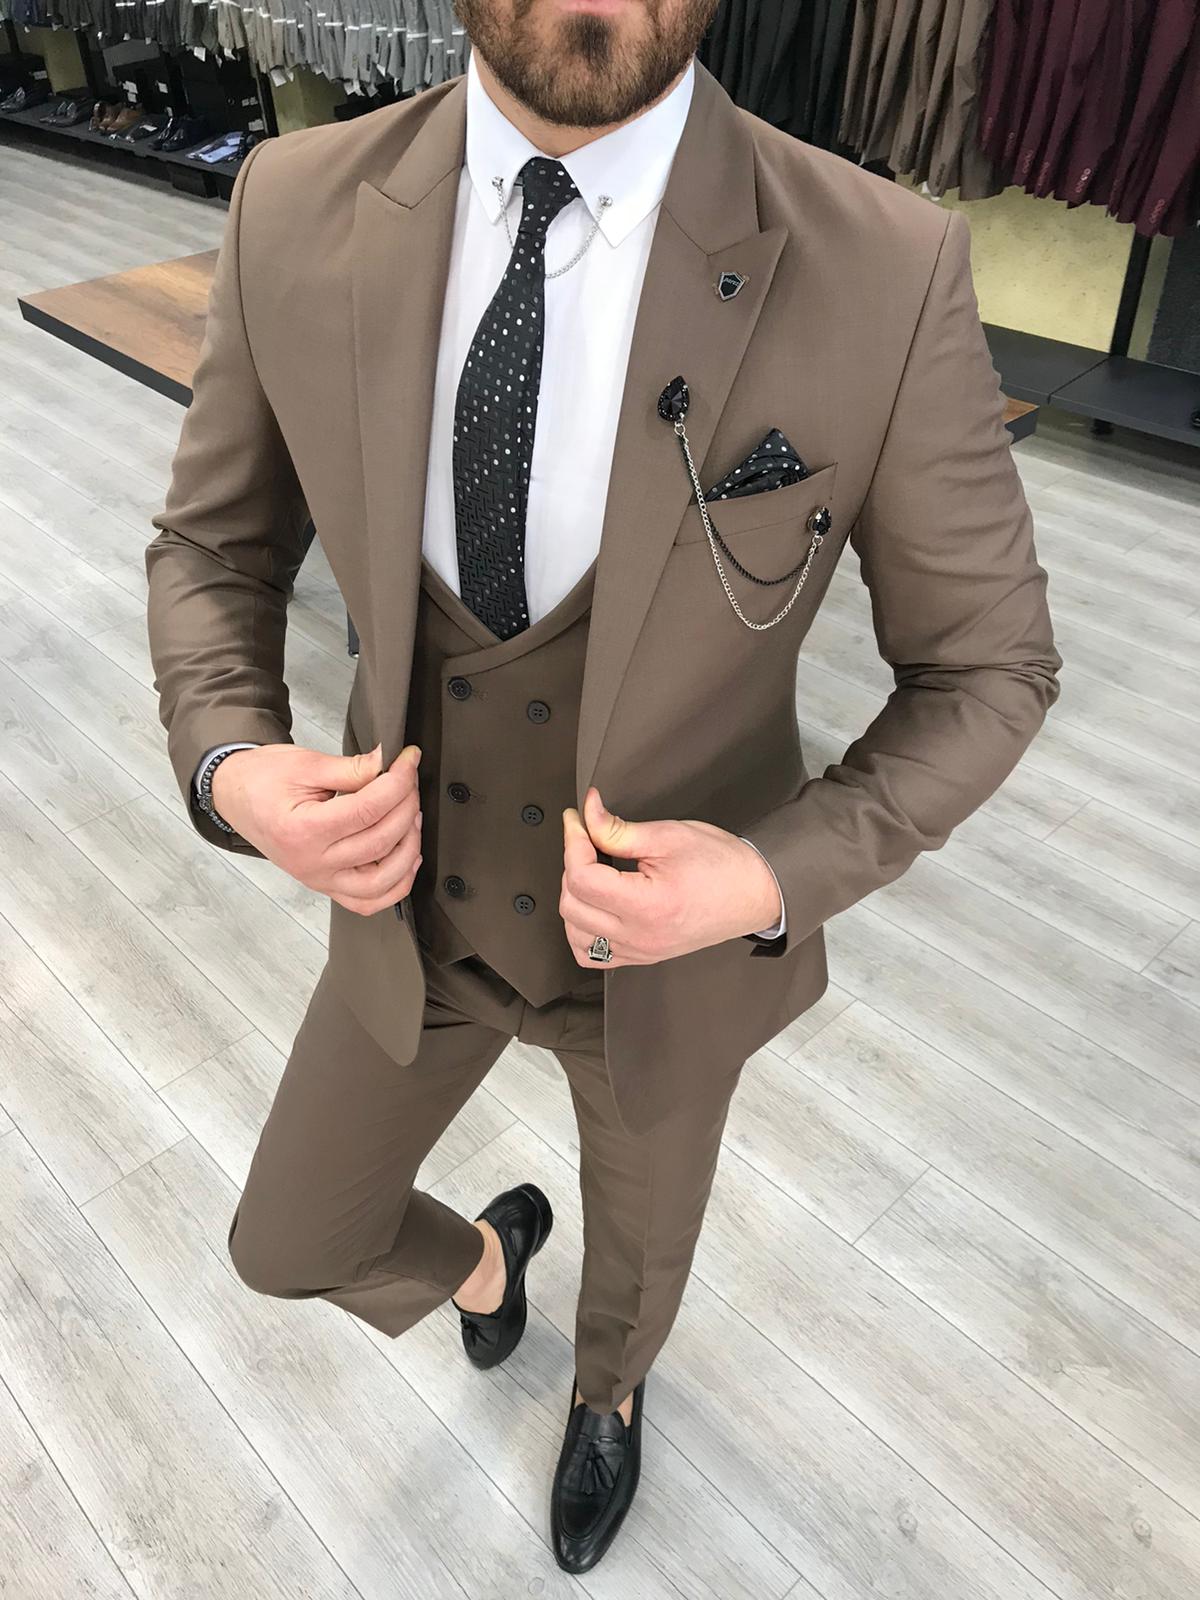 Basic Guide to Mens Suit Styles | Men Fashion Blog of Gentwith